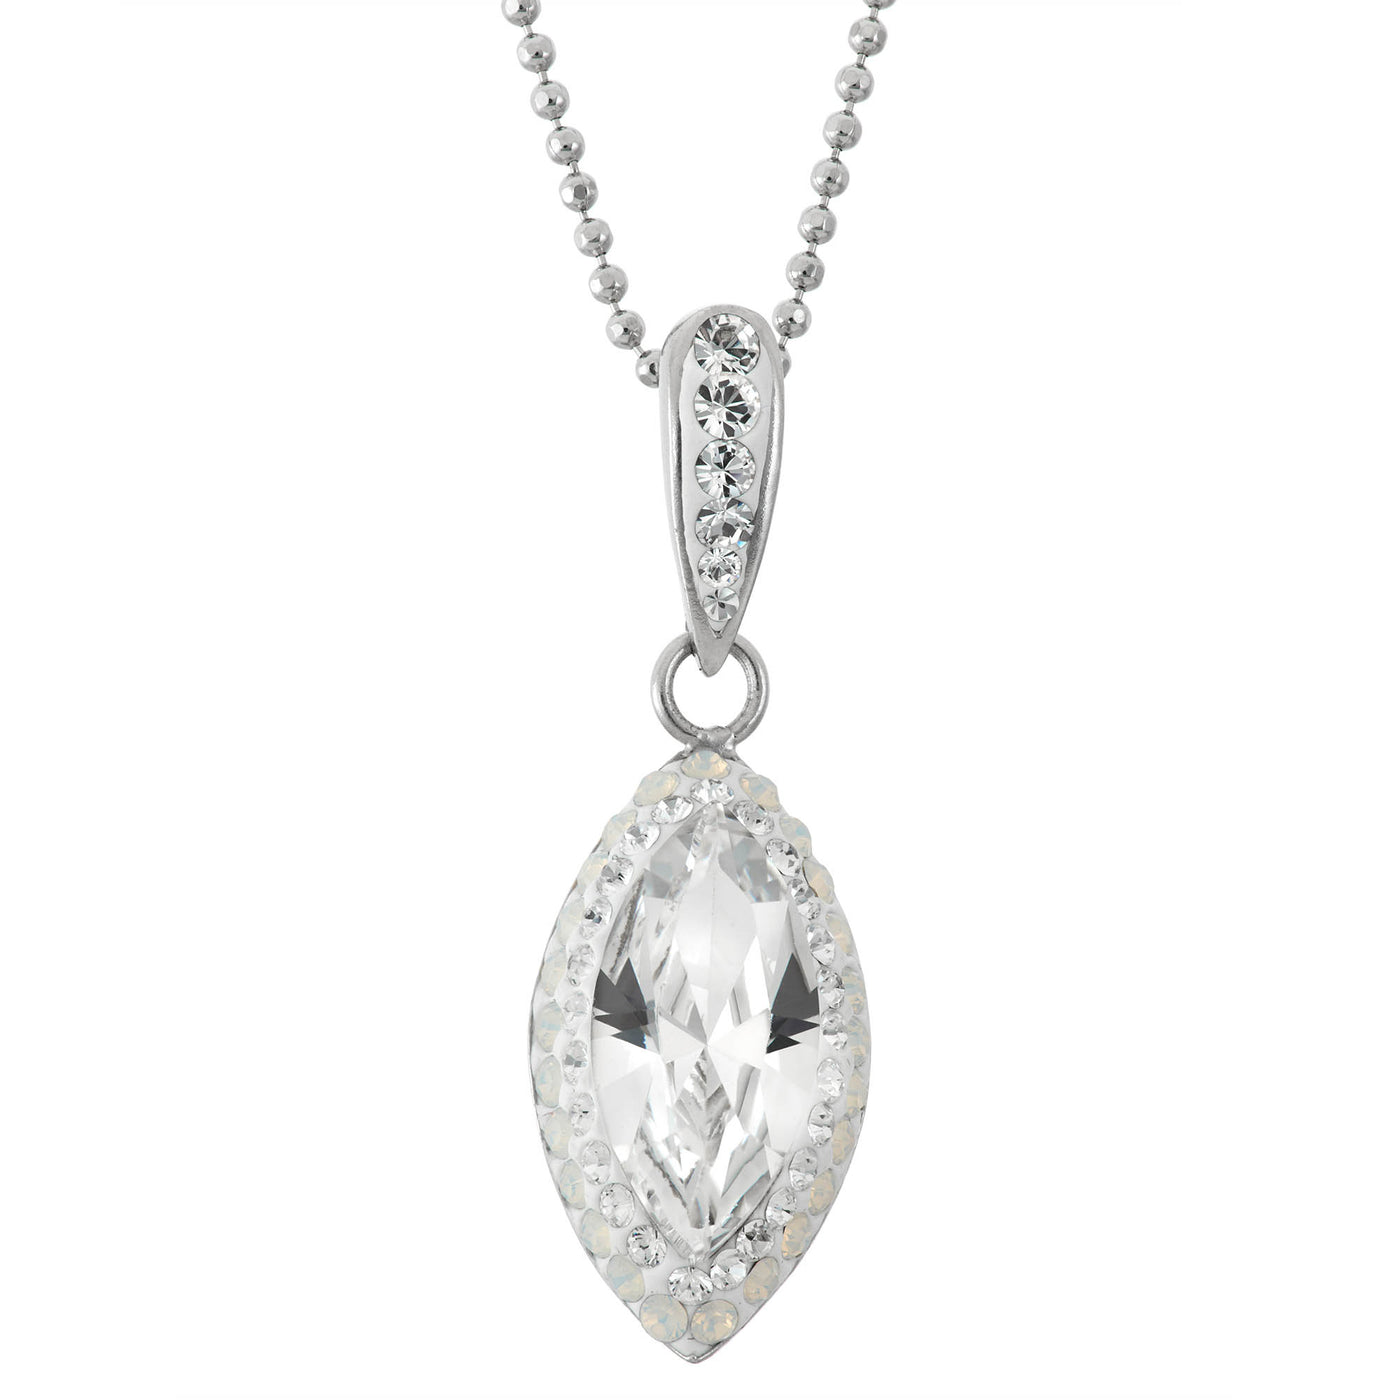 Rebecca Sloane Silver Elliptical Crystal With White Pave Pendant